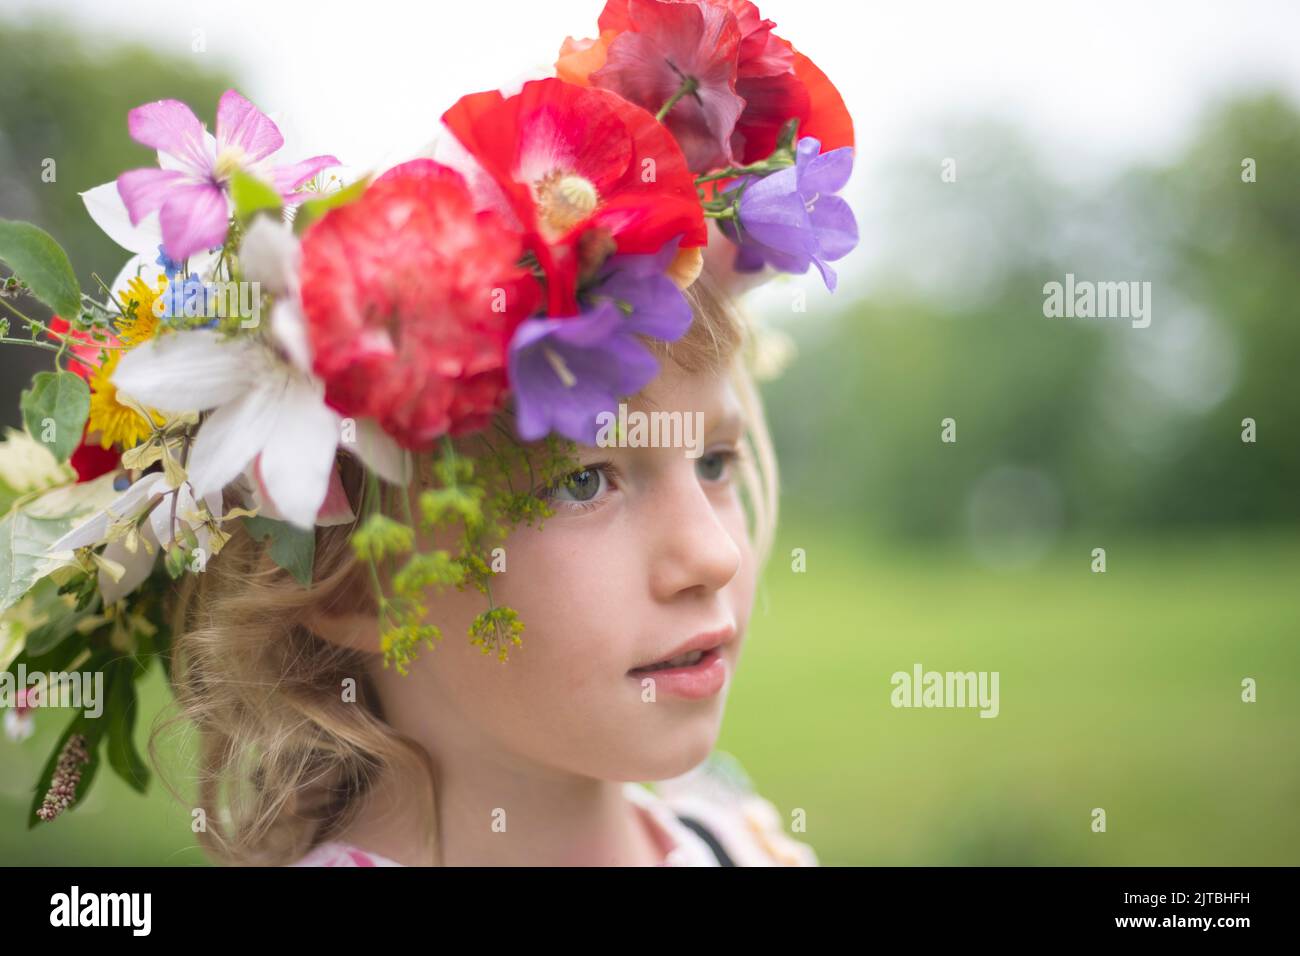 A young girl with blonde hair wears a flower crown with red poppies, blue campanula, and leaves against the green backdrop of a summer day. Stock Photo